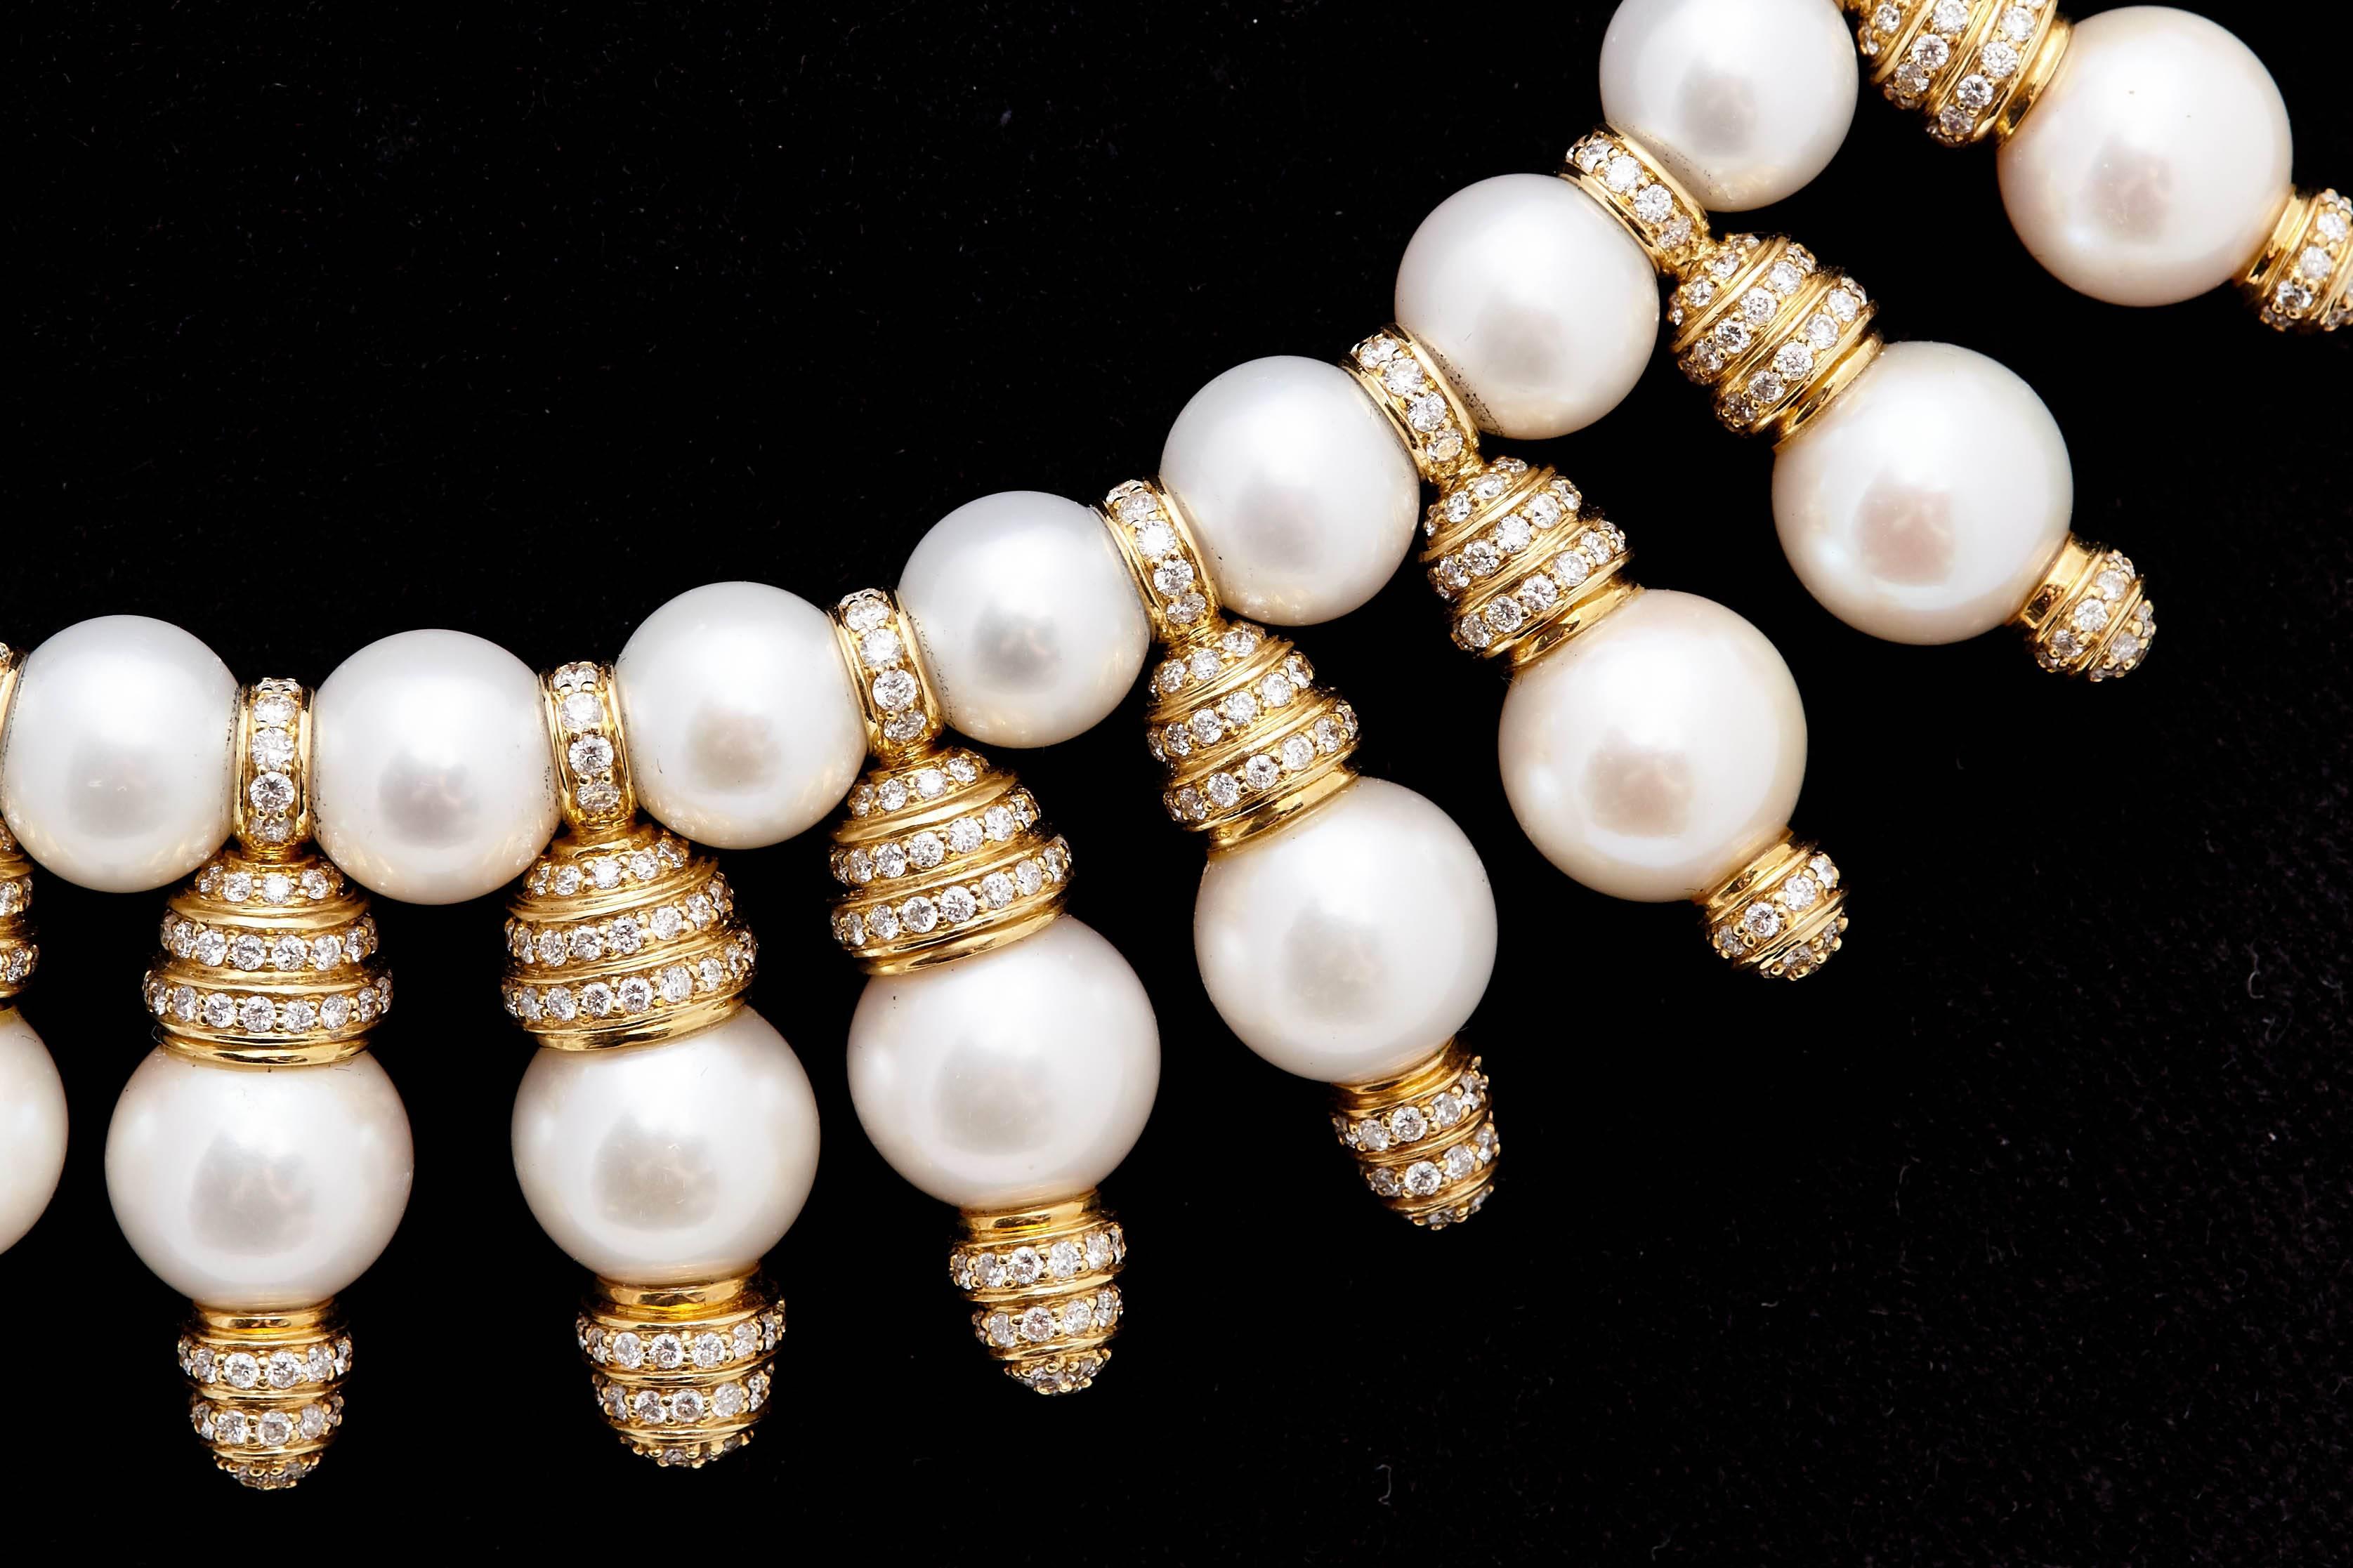 A beautiful necklace in 18K Yellow Gold with Diamonds & Cultured Pearls. Made in Italy. Circa 1980s. The size could be altered and with spare elements, matching ear pendants could be made.